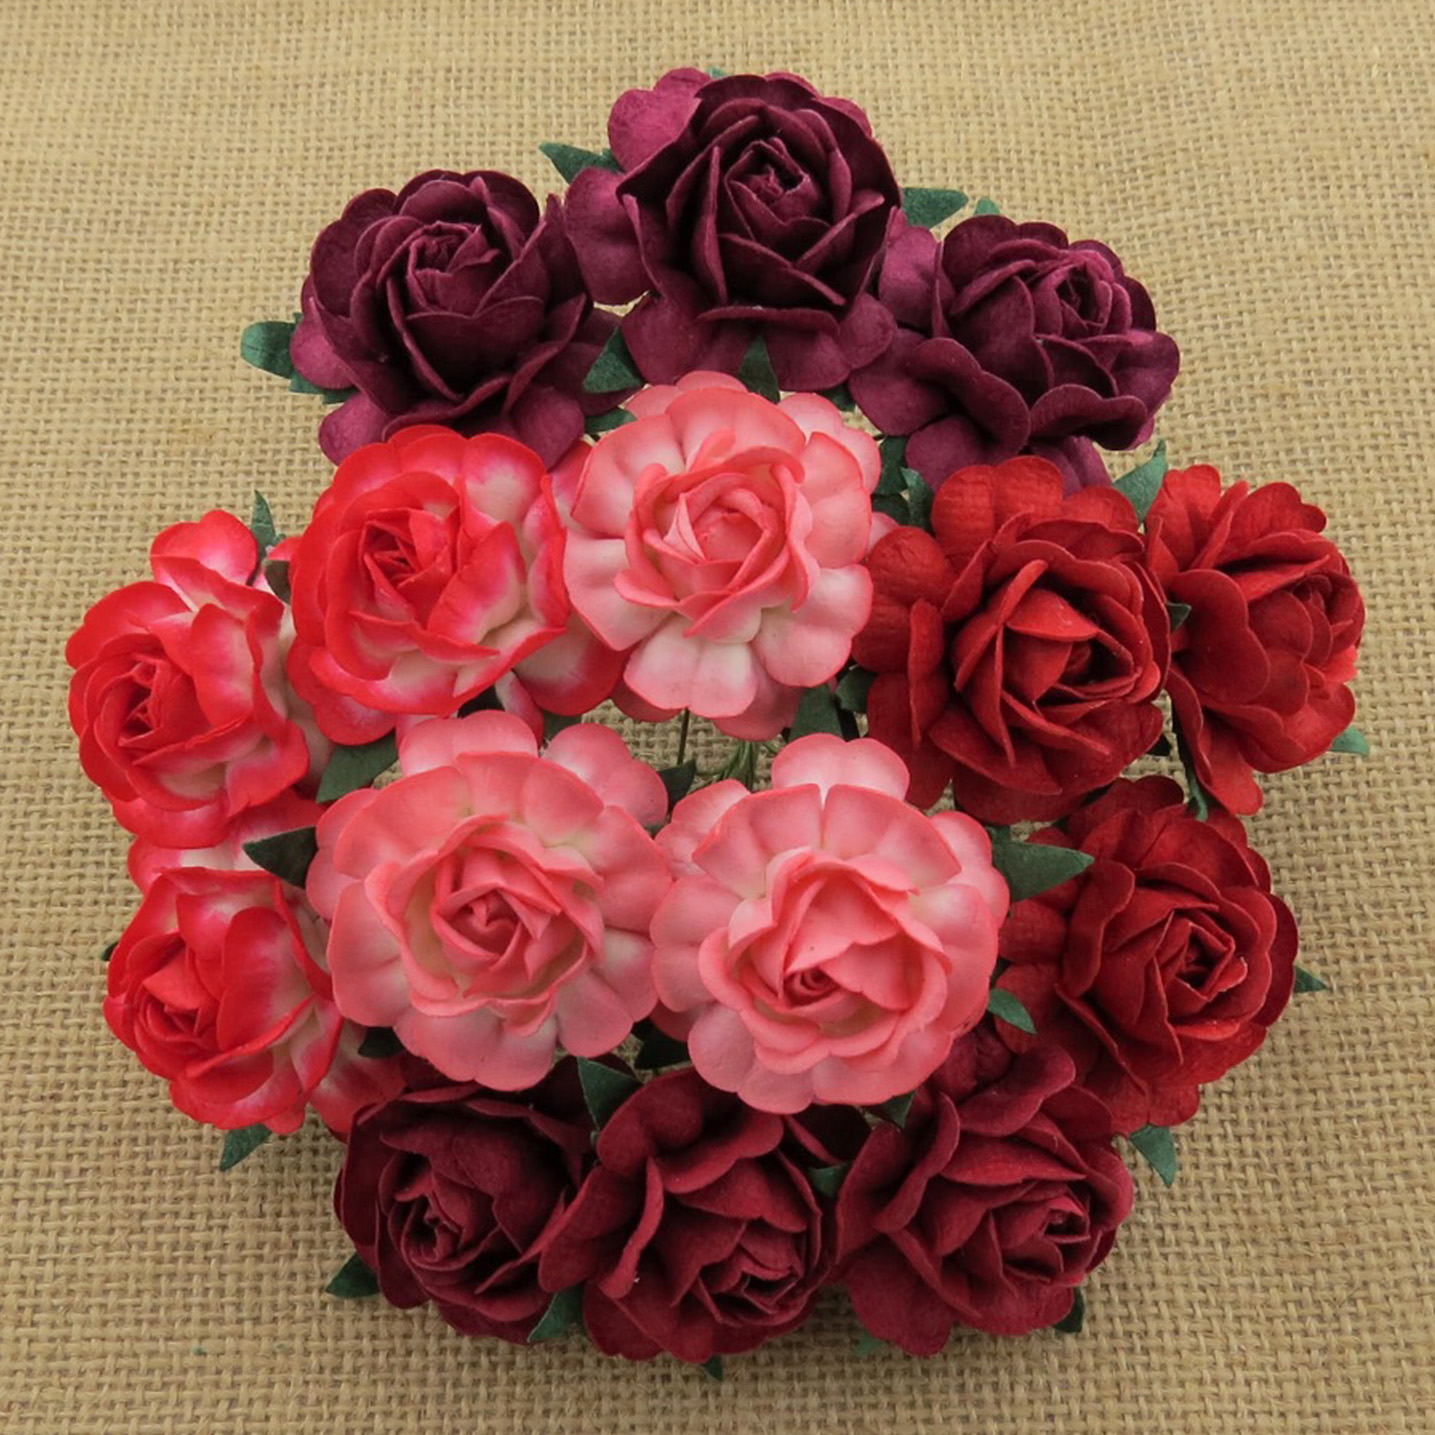 50 MIXED RED MULBERRY PAPER TEA ROSES 40mm - 5 COLOR